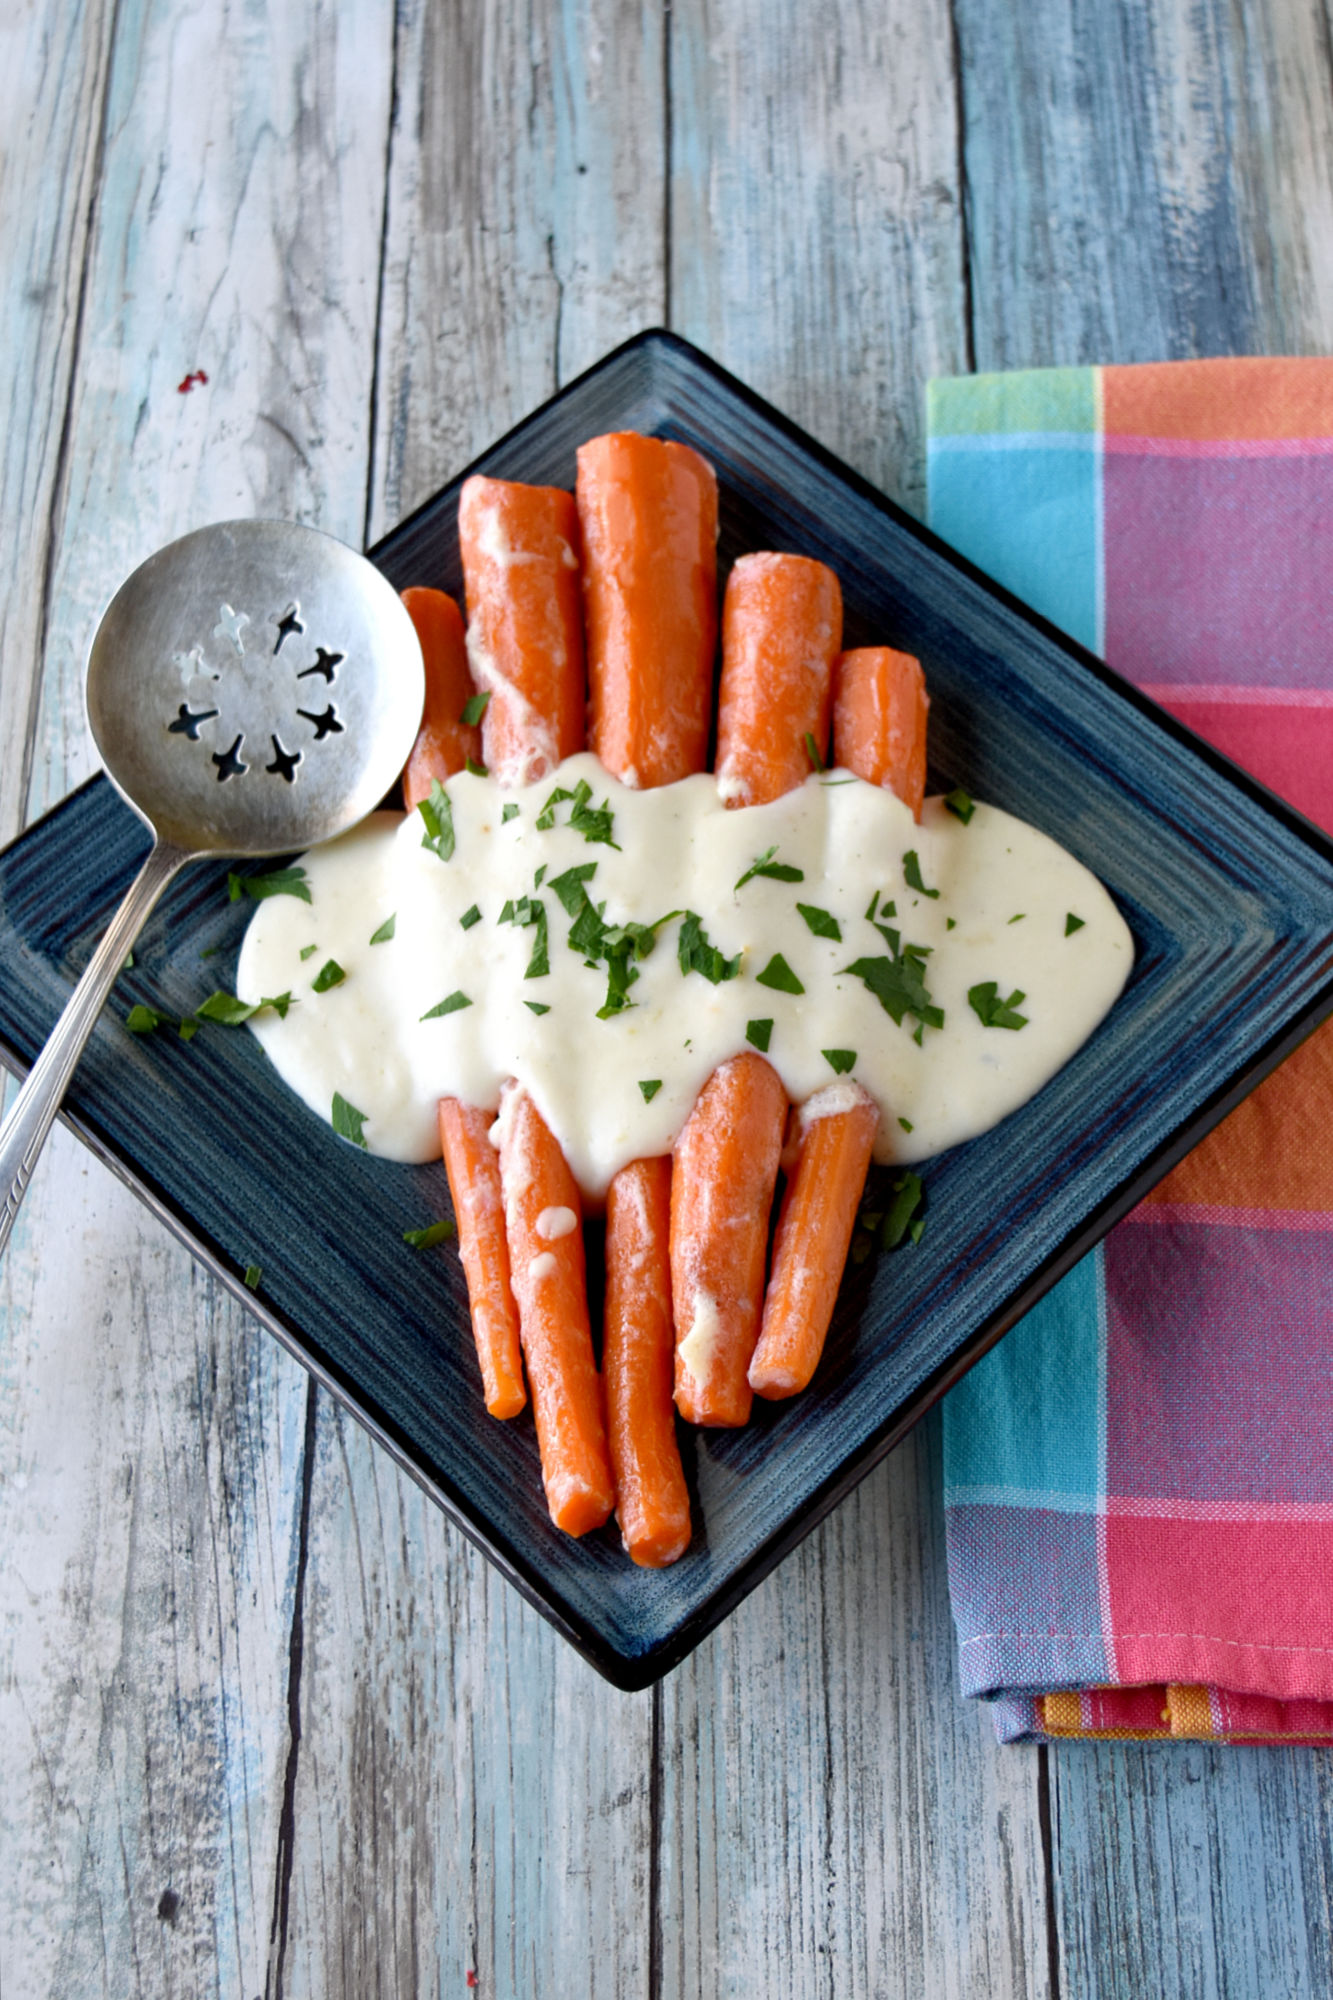 Irish Buttered Carrots, also called (Slieve Na Mbam) is a simple dish that tastes delicious. Simmered in milk and butter, they’re sweet, butter, and packed with flavor.  #OurFamilyTable #easyrecipe #carrotrecipe #Irishrecipe